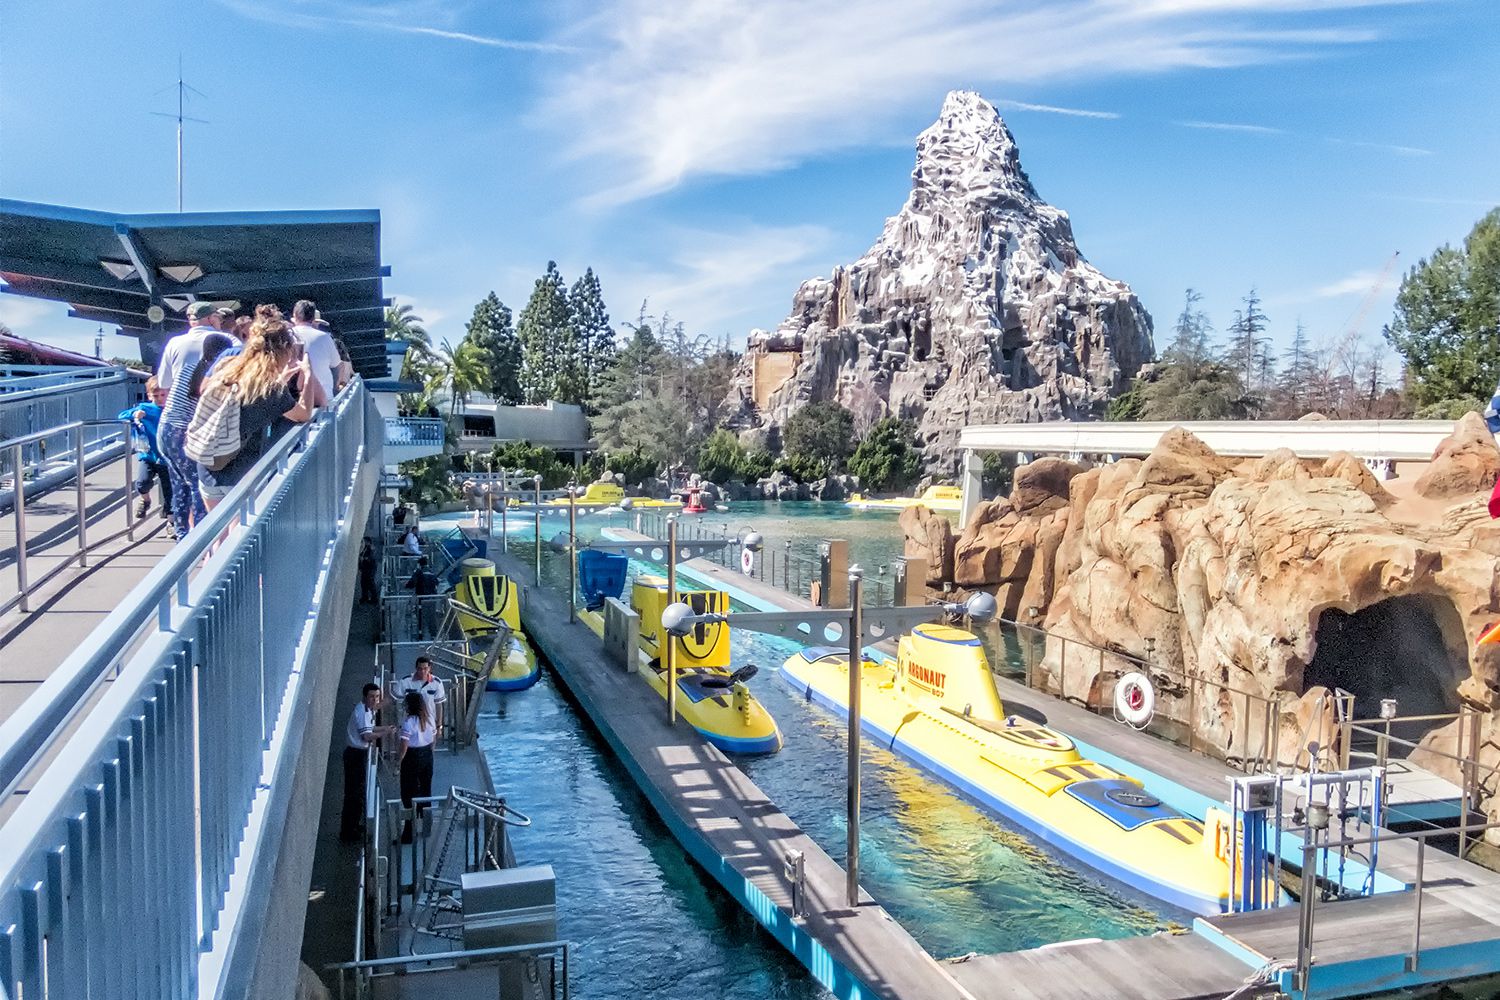 Most Popular Disneyland Rides: Why to Avoid Some of Them